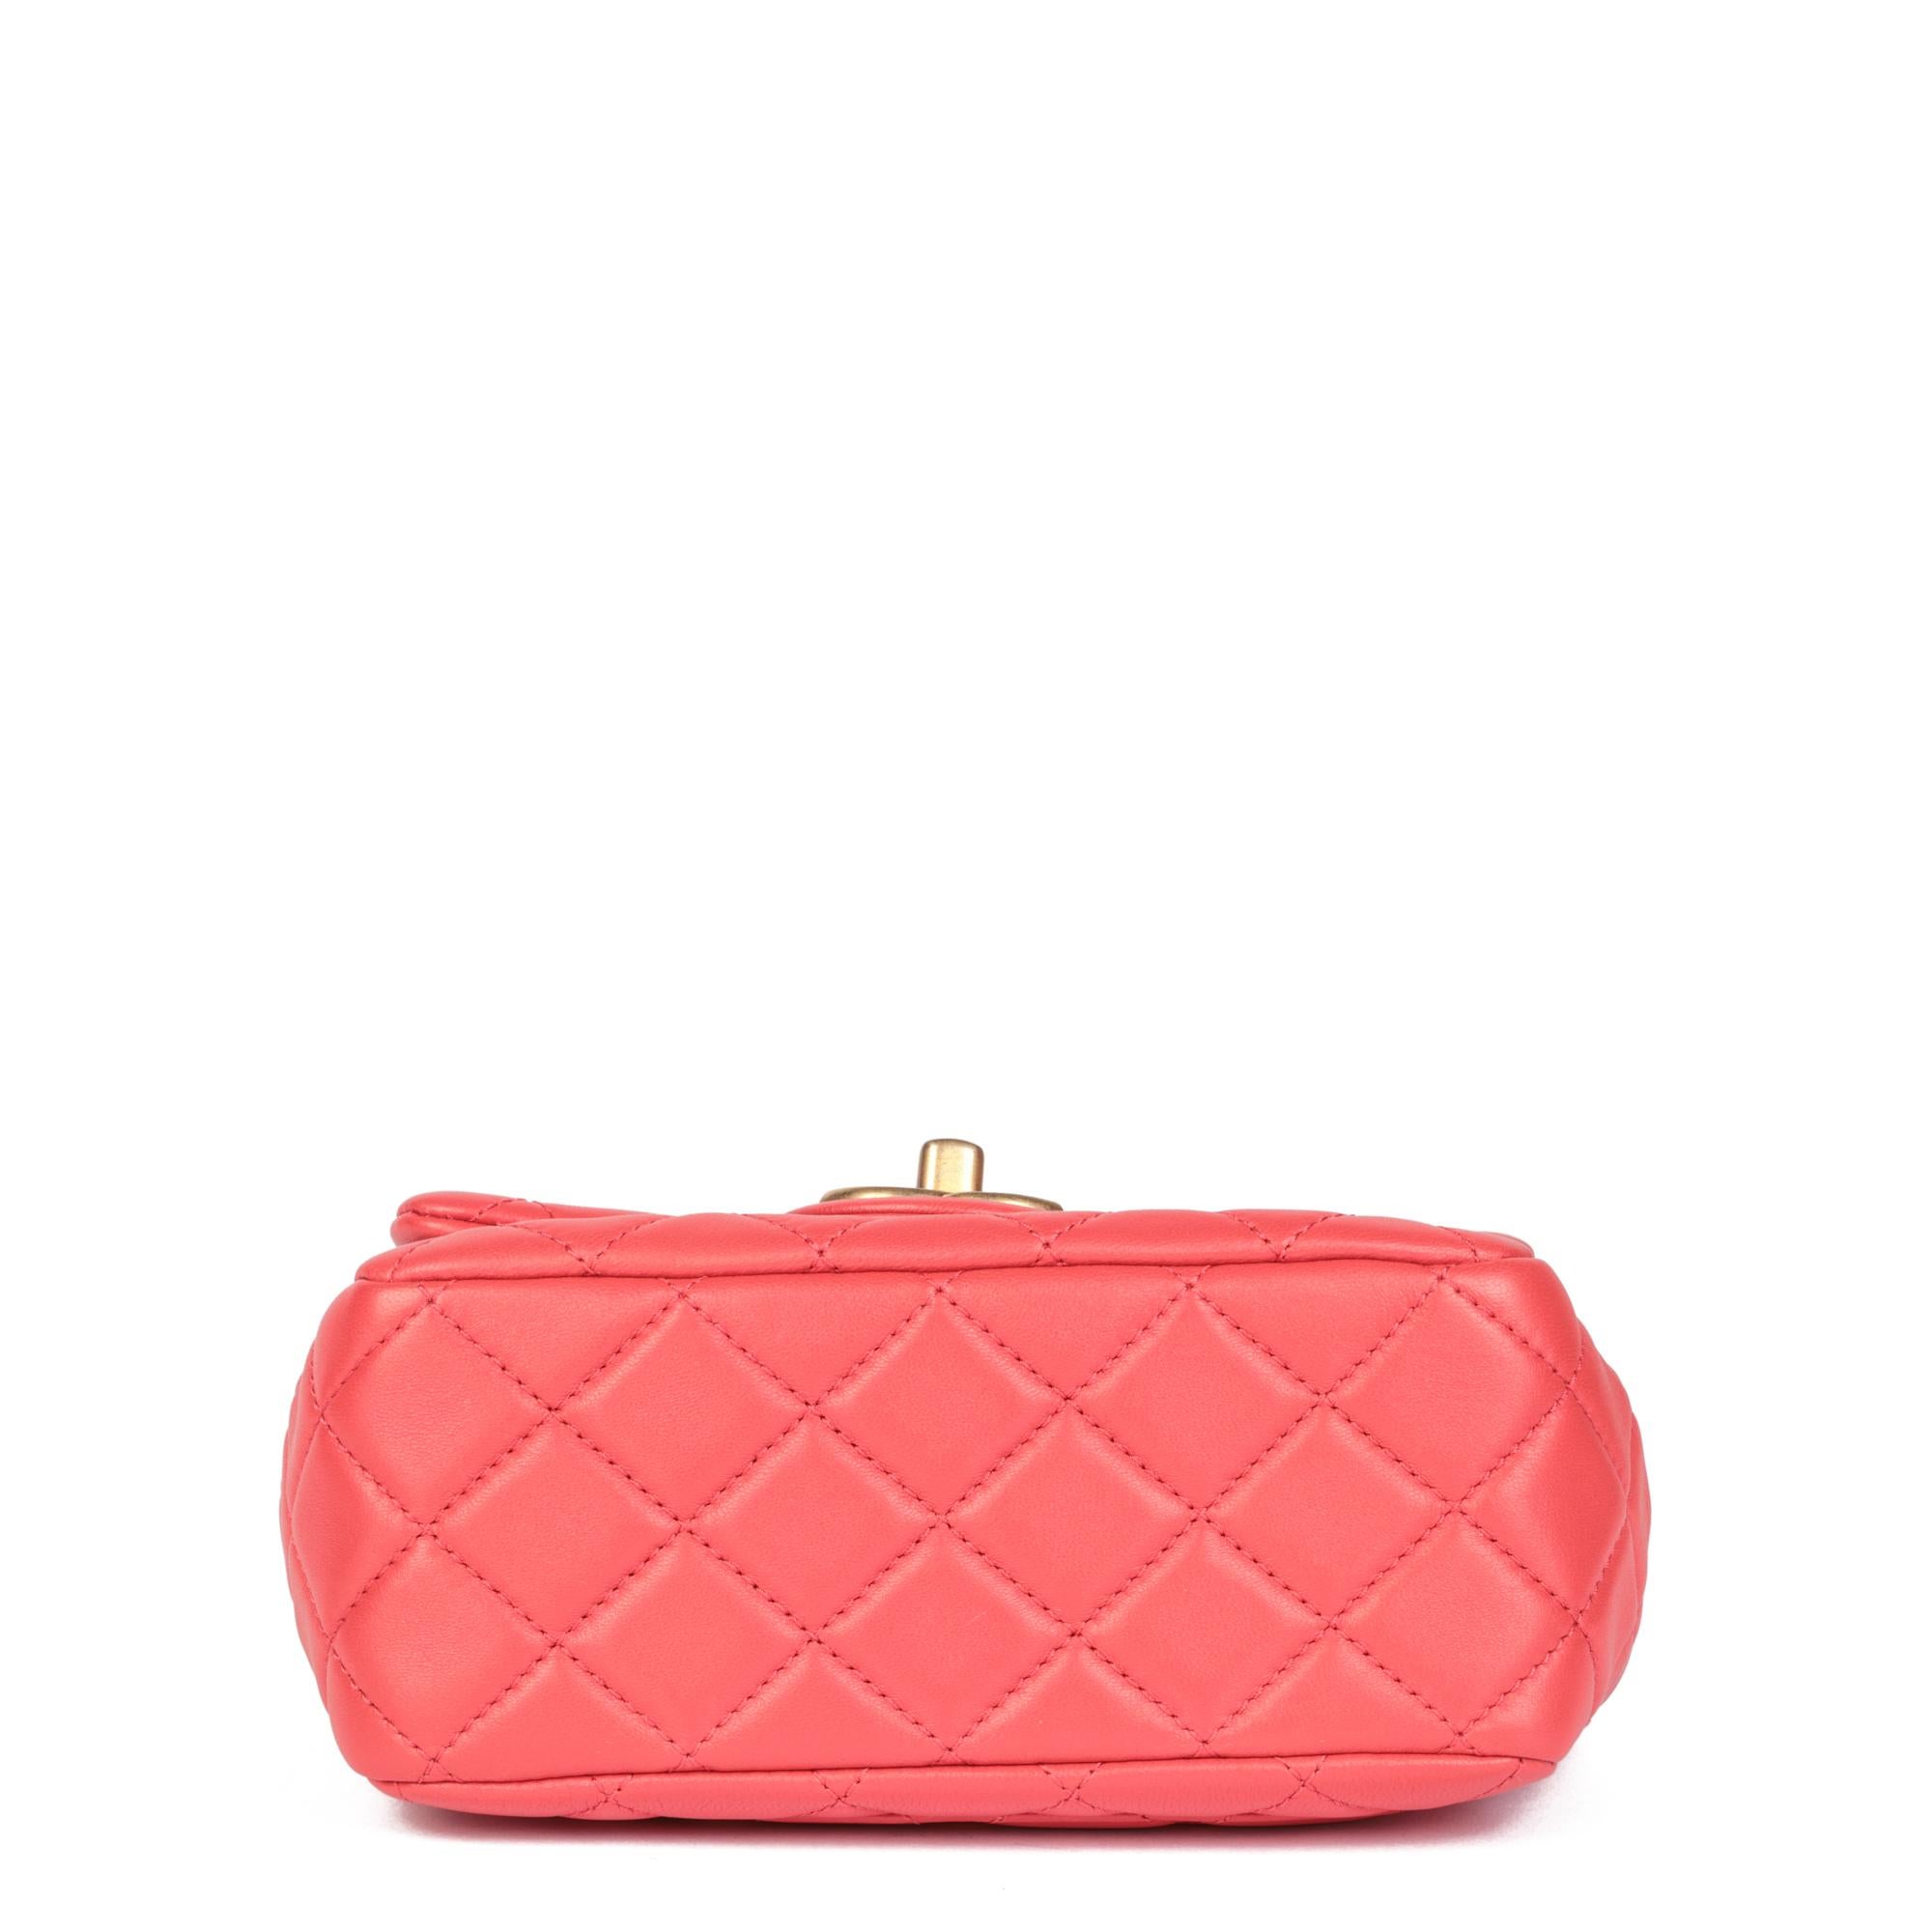 CHANEL Coral Red Quilted Lambskin Jewels Square Mini Flap Bag For Sale 2